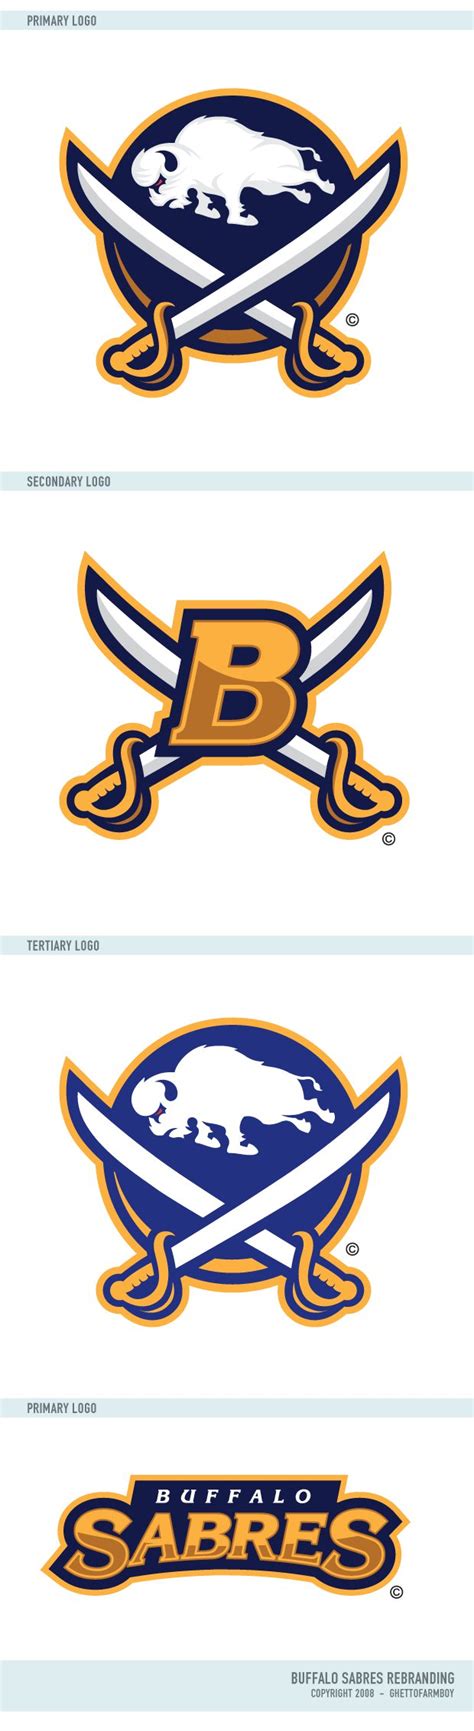 New Buffalo Sabres Rebranding Based Off Of The Classic Design When The